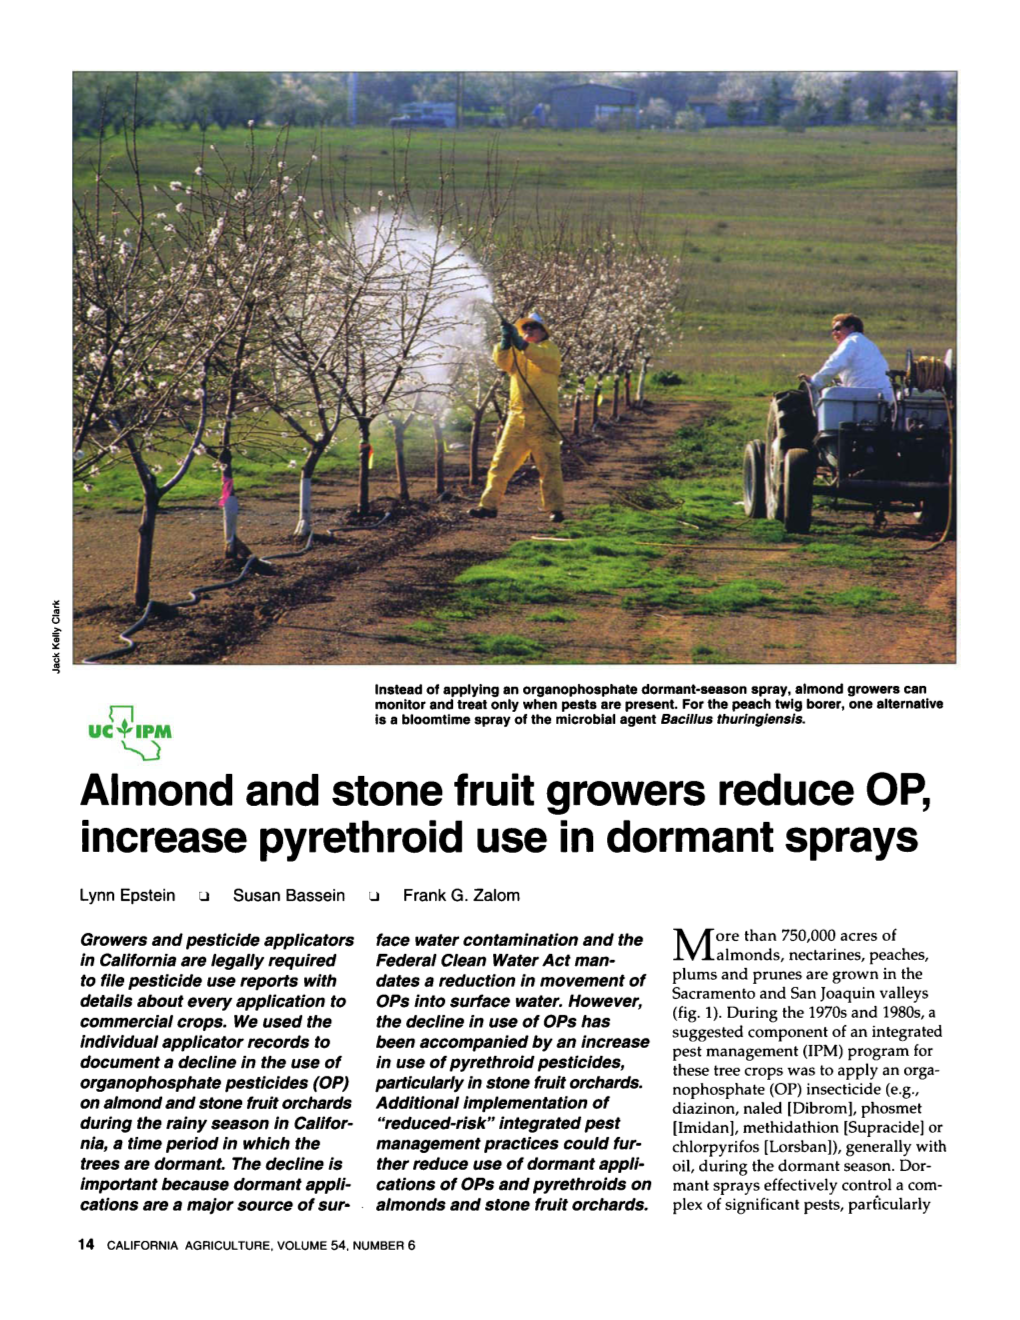 Almond and Stone Fruit Growers Reduce OP, Increase Pyrethroid Use in Dormant Sprays